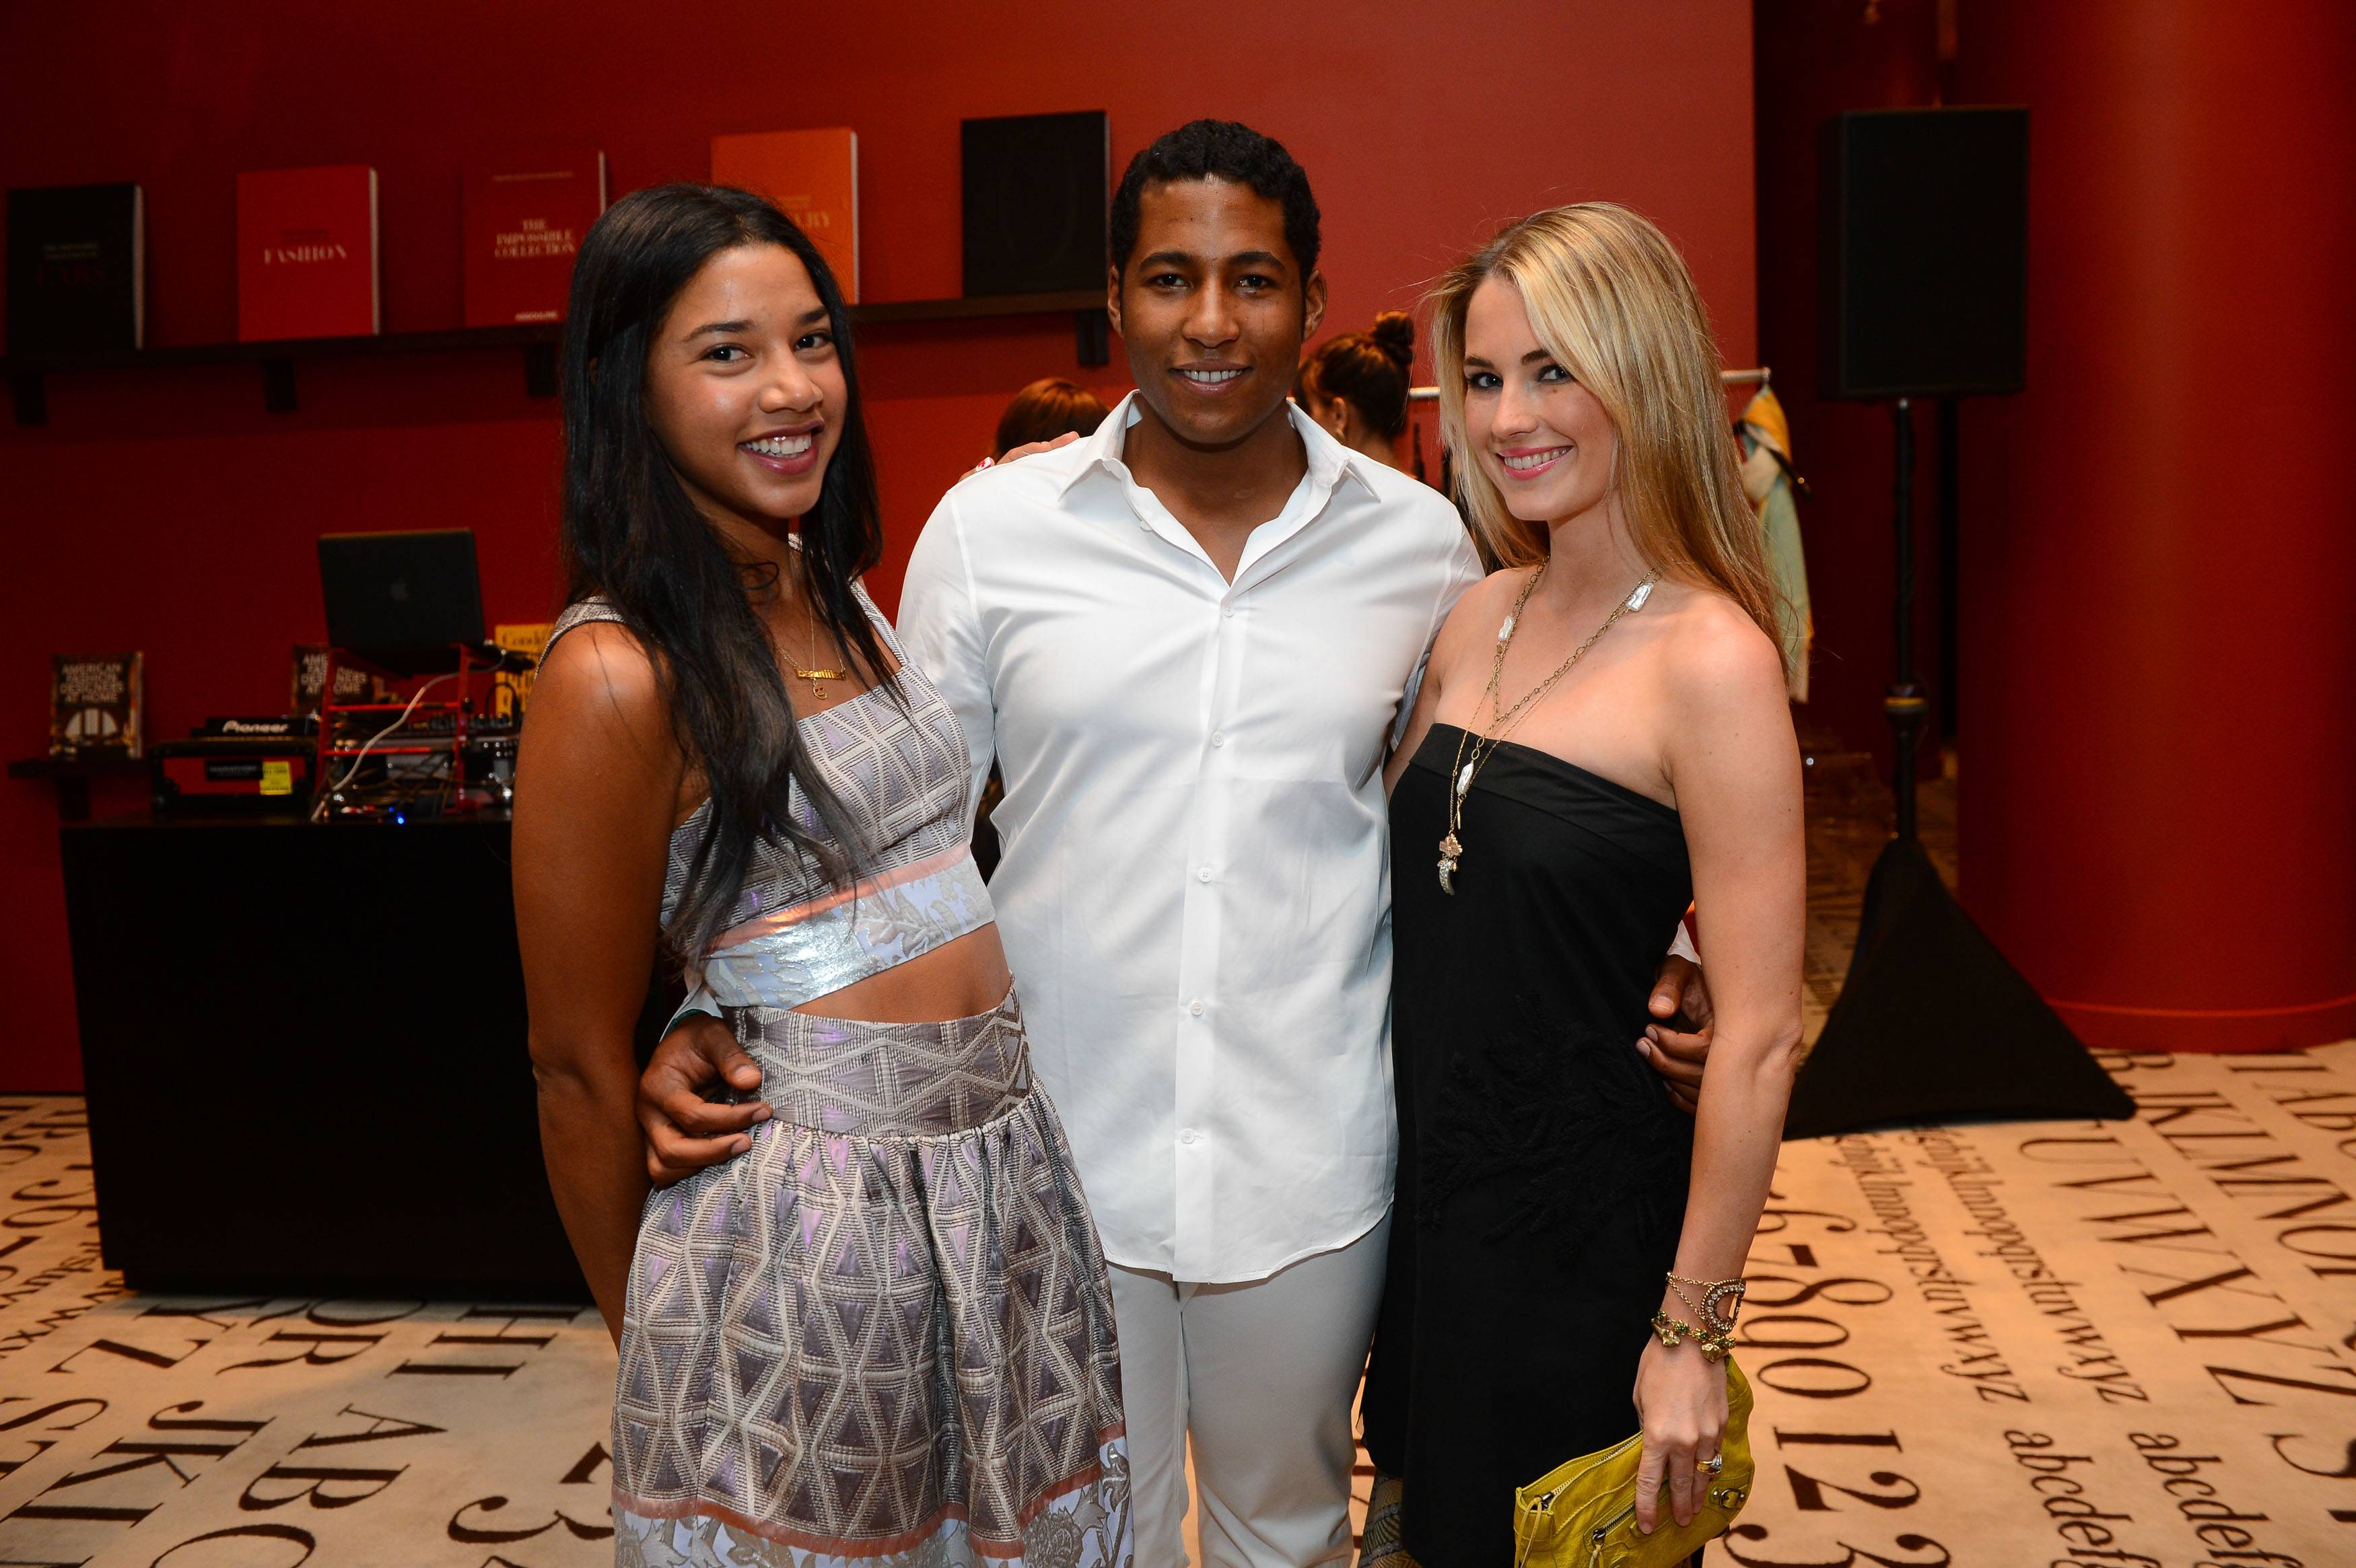 Hannah Bronfman, Hassan Pierre and Amanda Hearst at the opening of Maison de Mode.